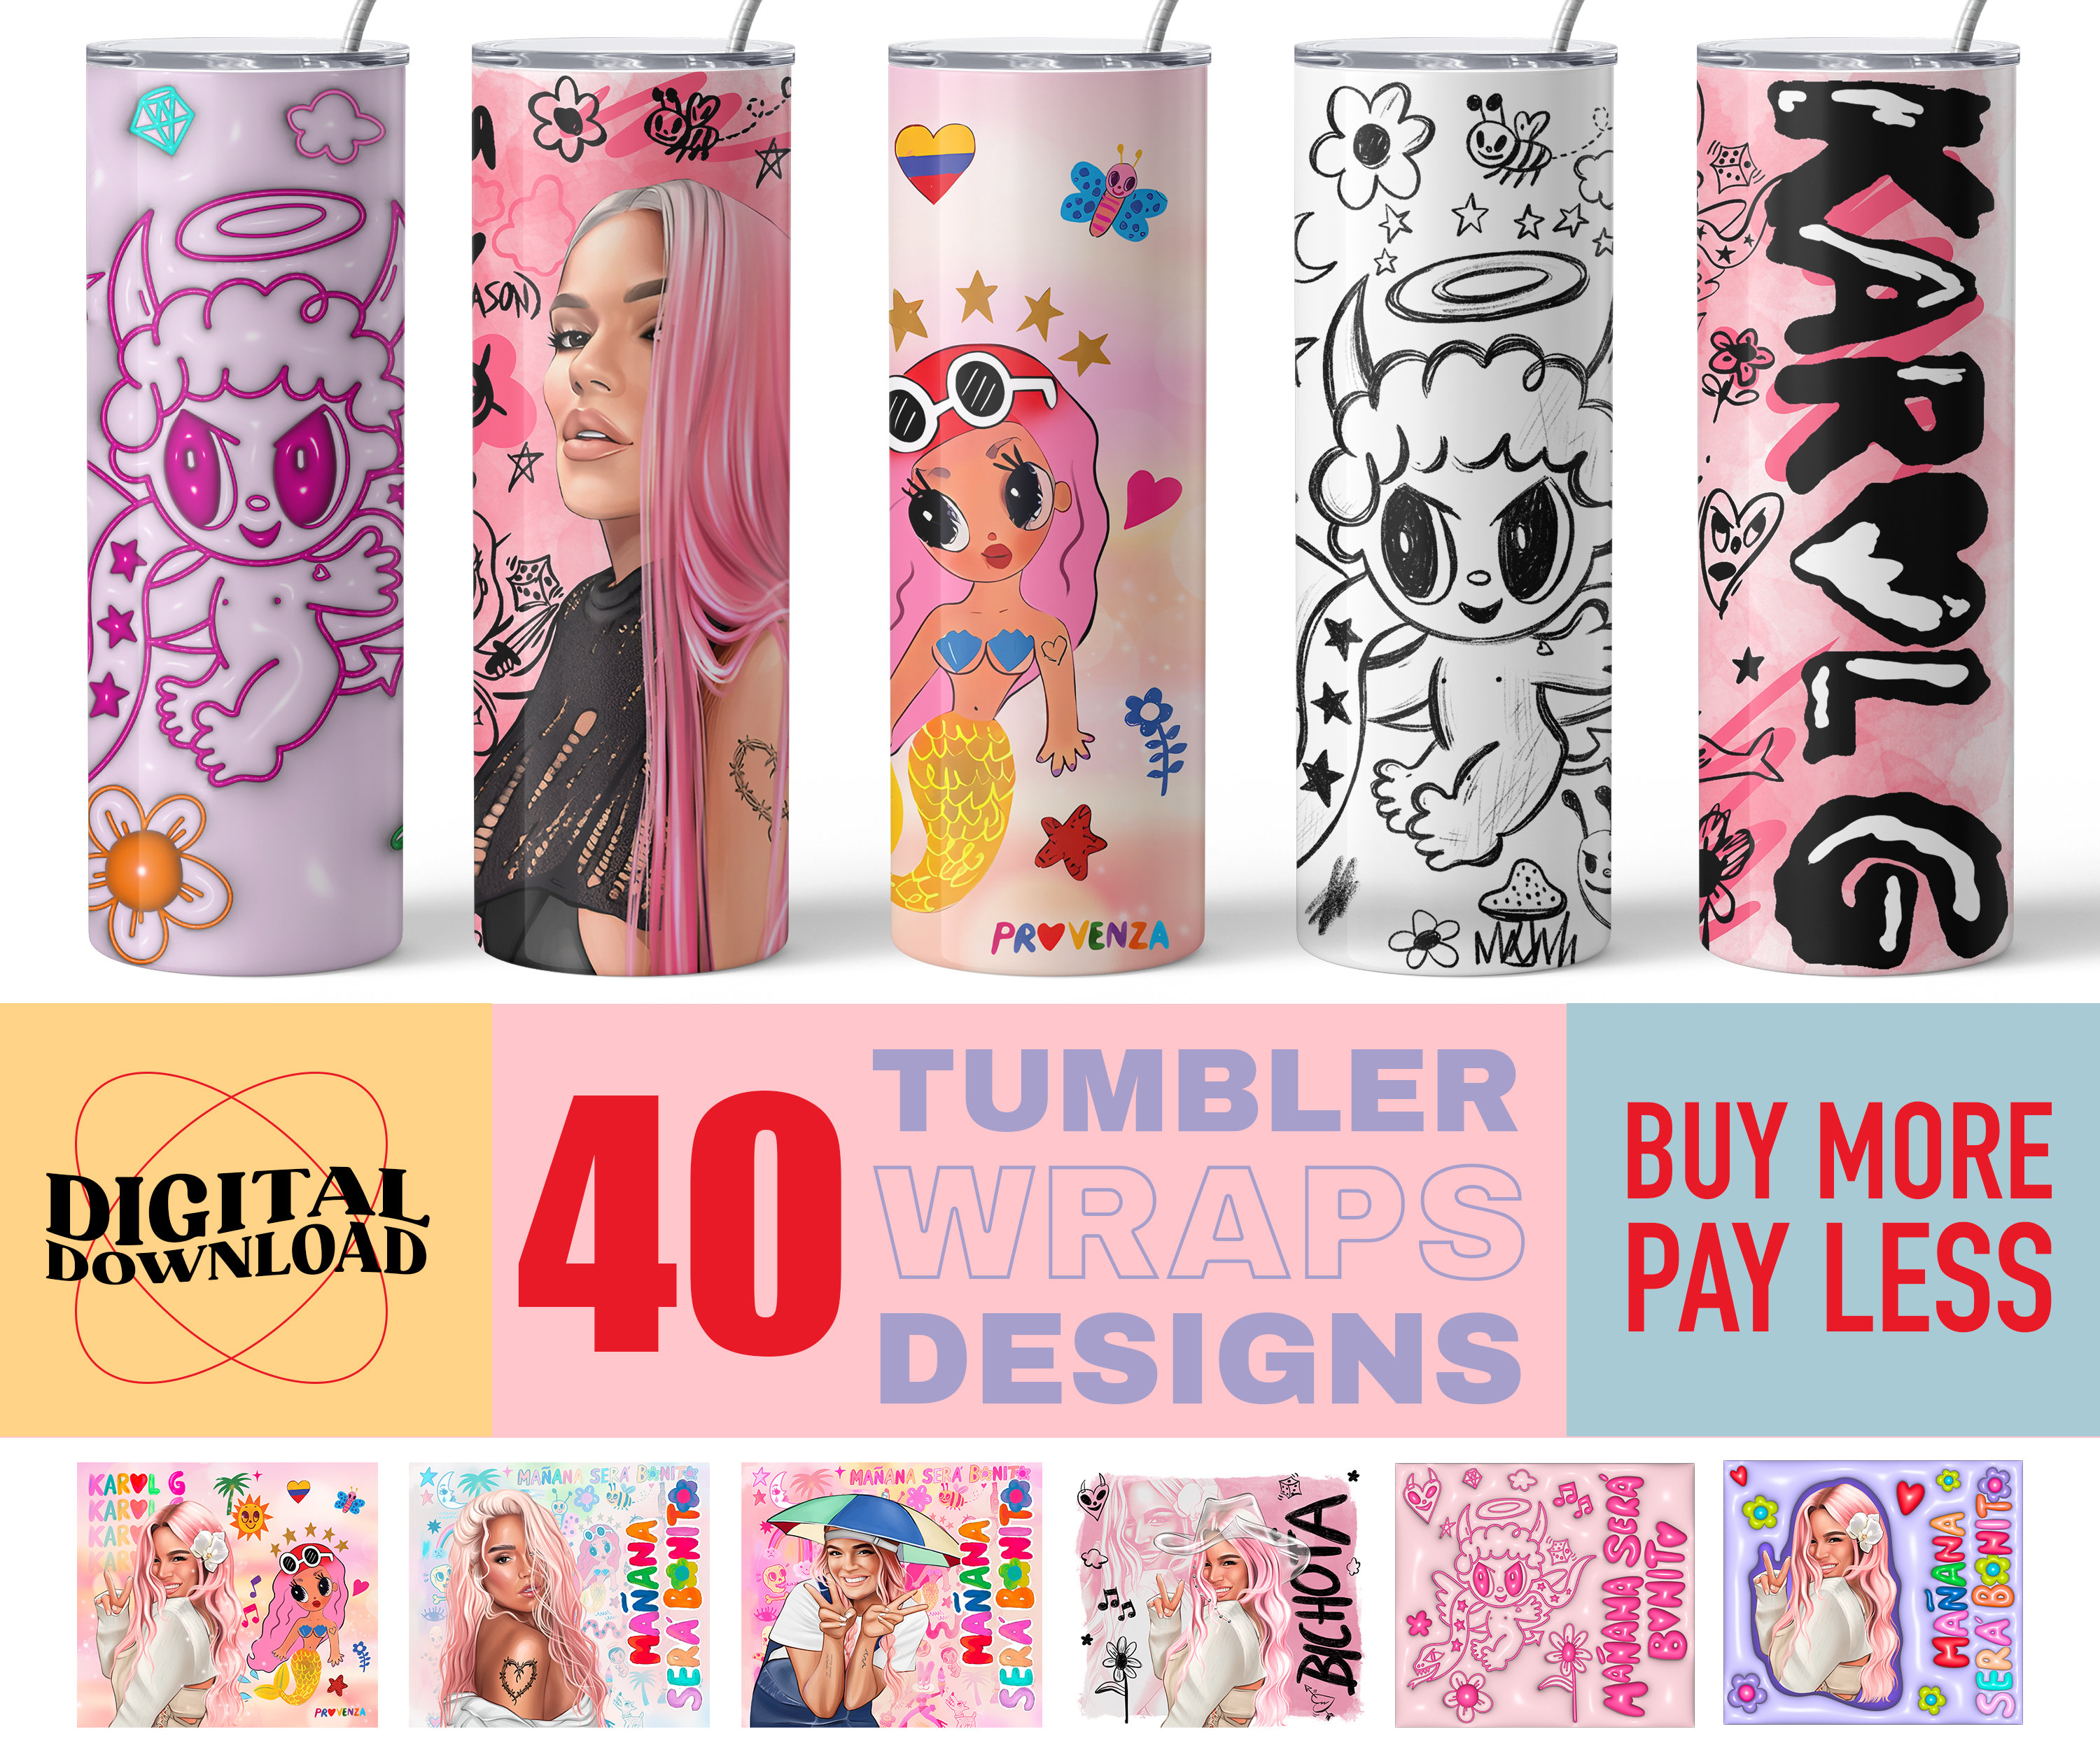 Y2K Aesthetic Color Tumbler Wrap Graphic by Pet Cave · Creative Fabrica